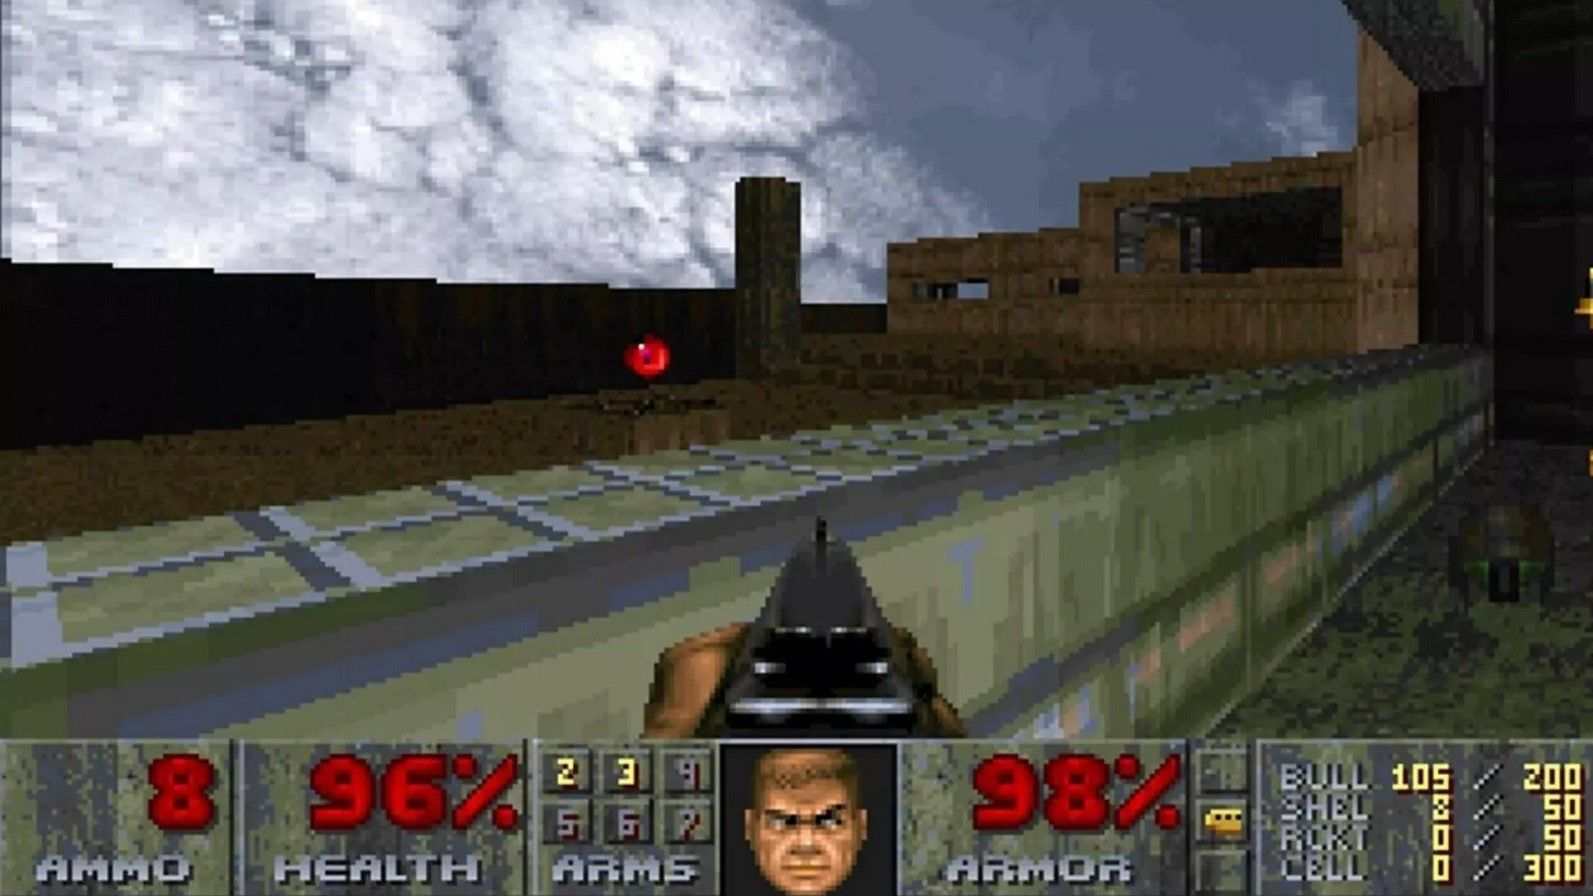 doom played in space by satellite computer 'ten times more powerful than any current esa spacecraft'